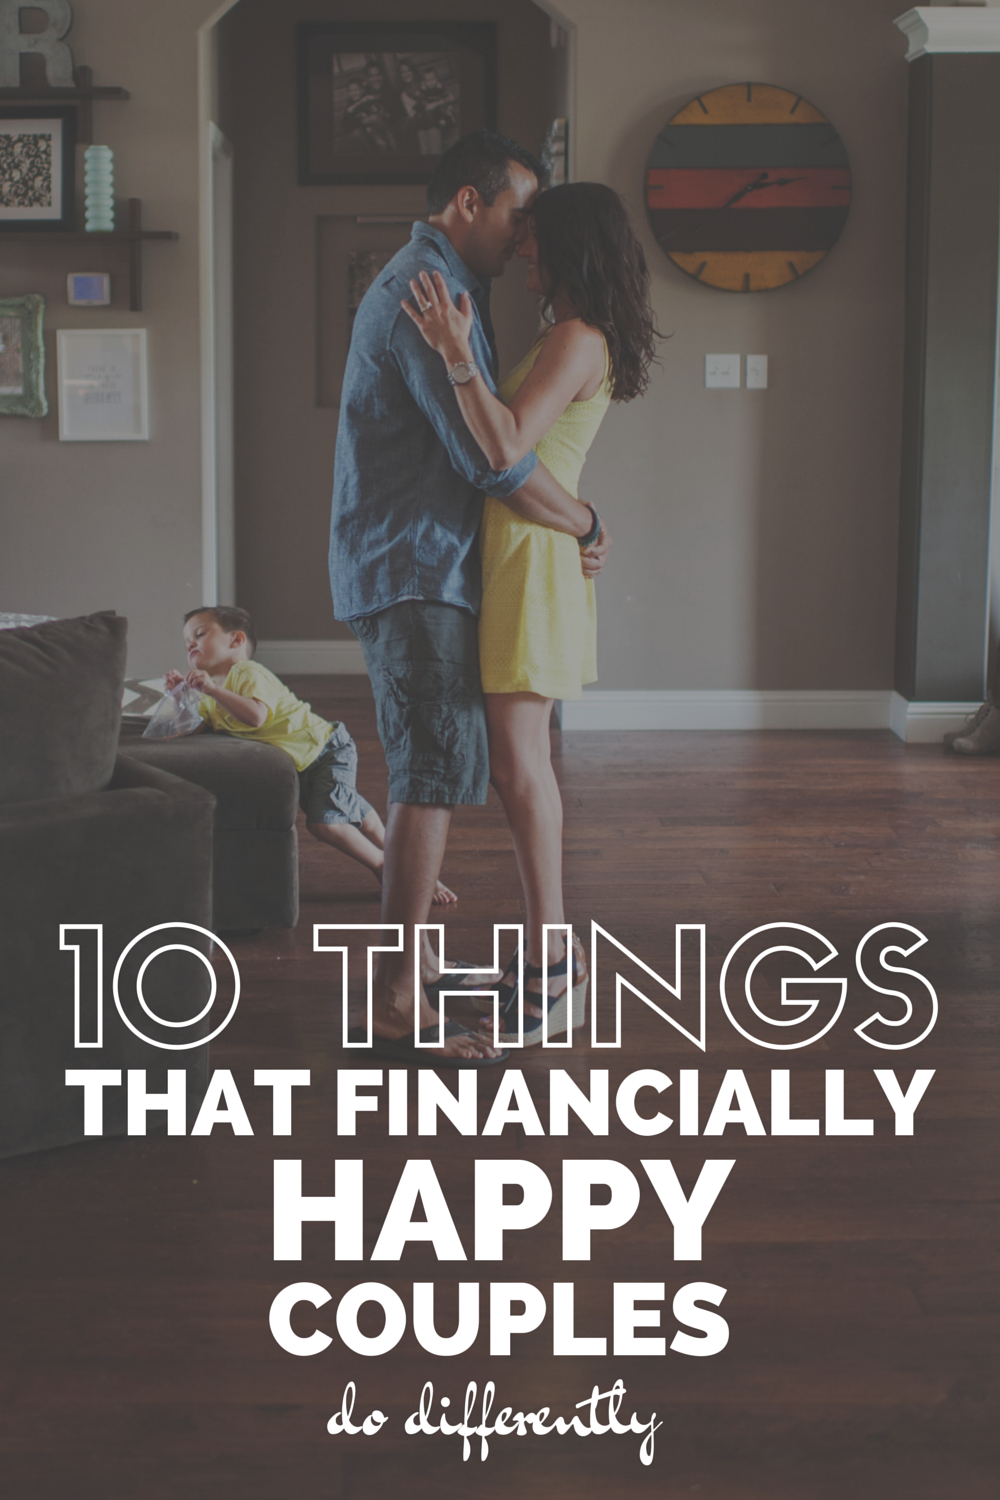 Mm 27 And 28 10 Things That Financially Happy Couples Do Differently